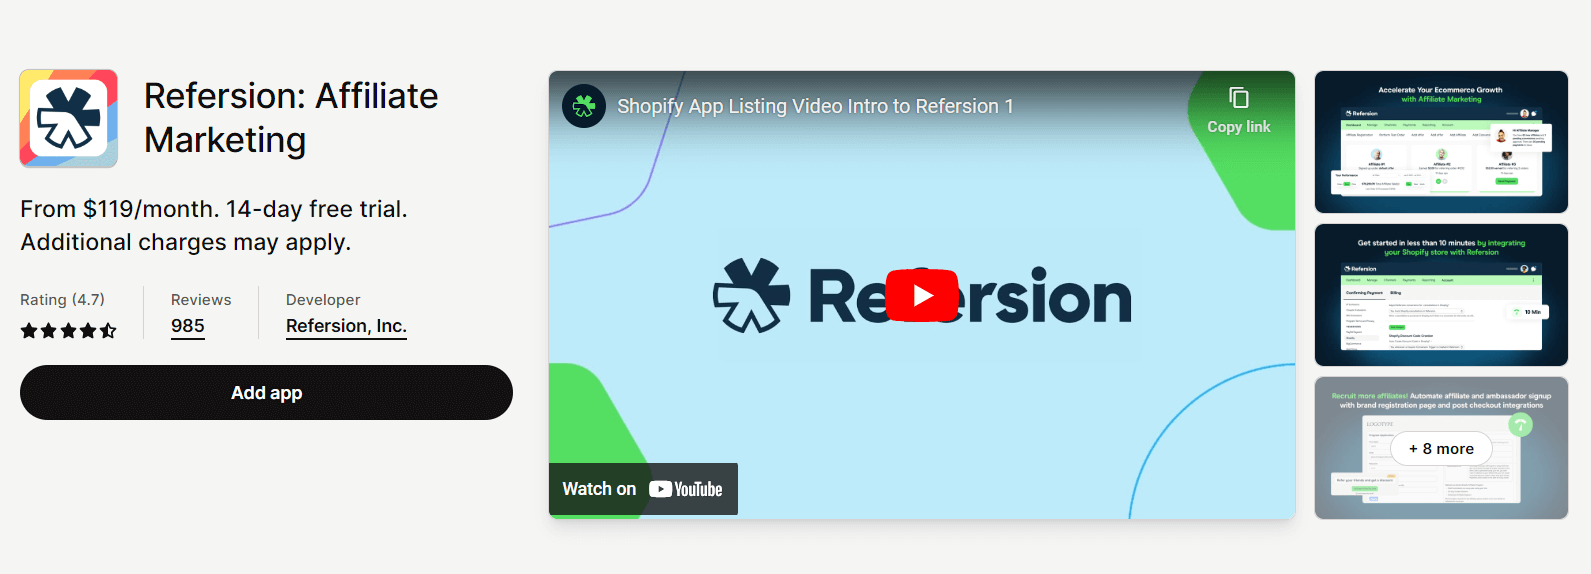 Best marketing apps for Shopify - Refersion